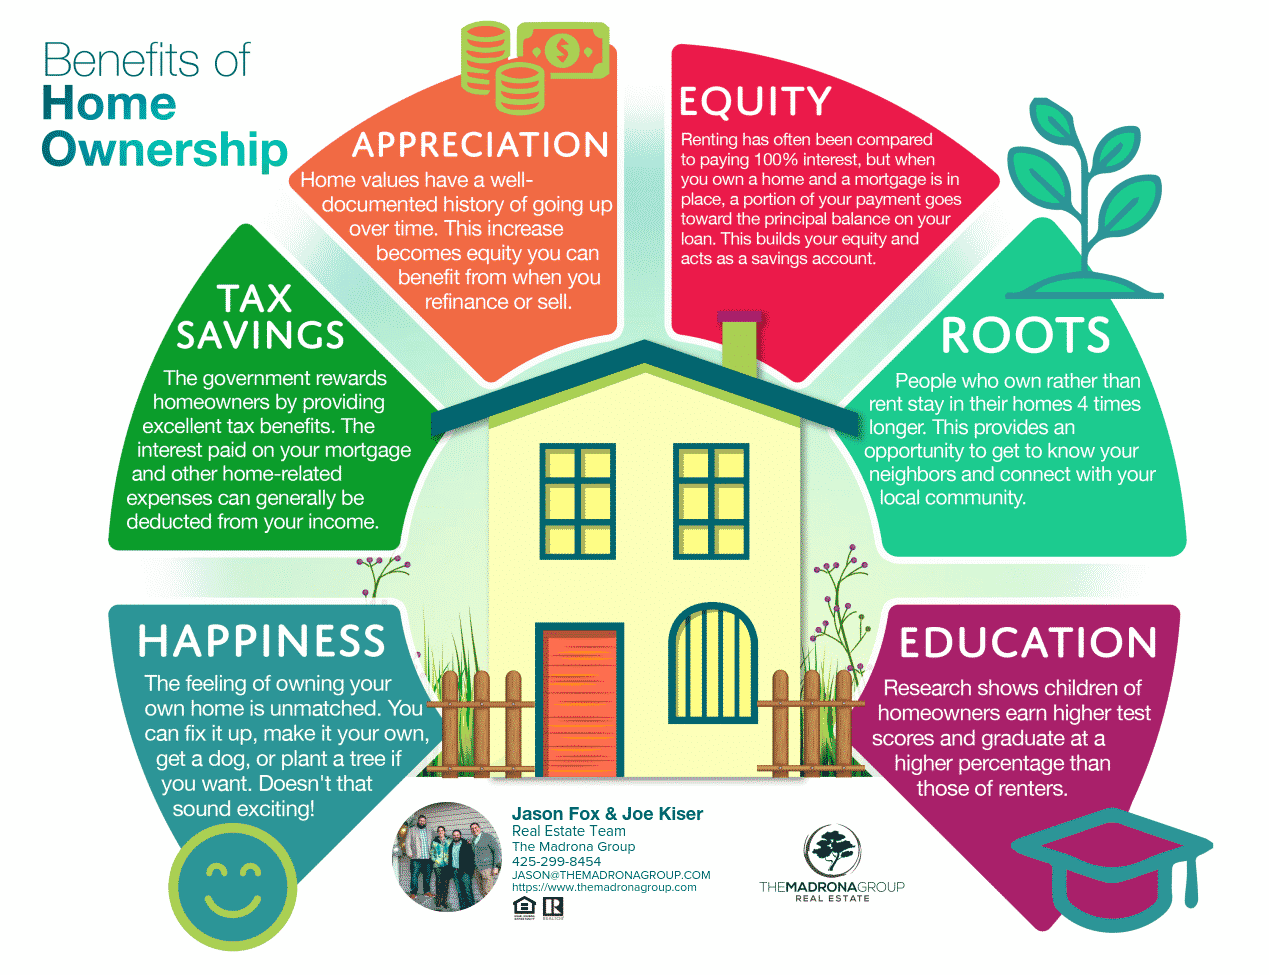 6 Benefits of Home Ownership